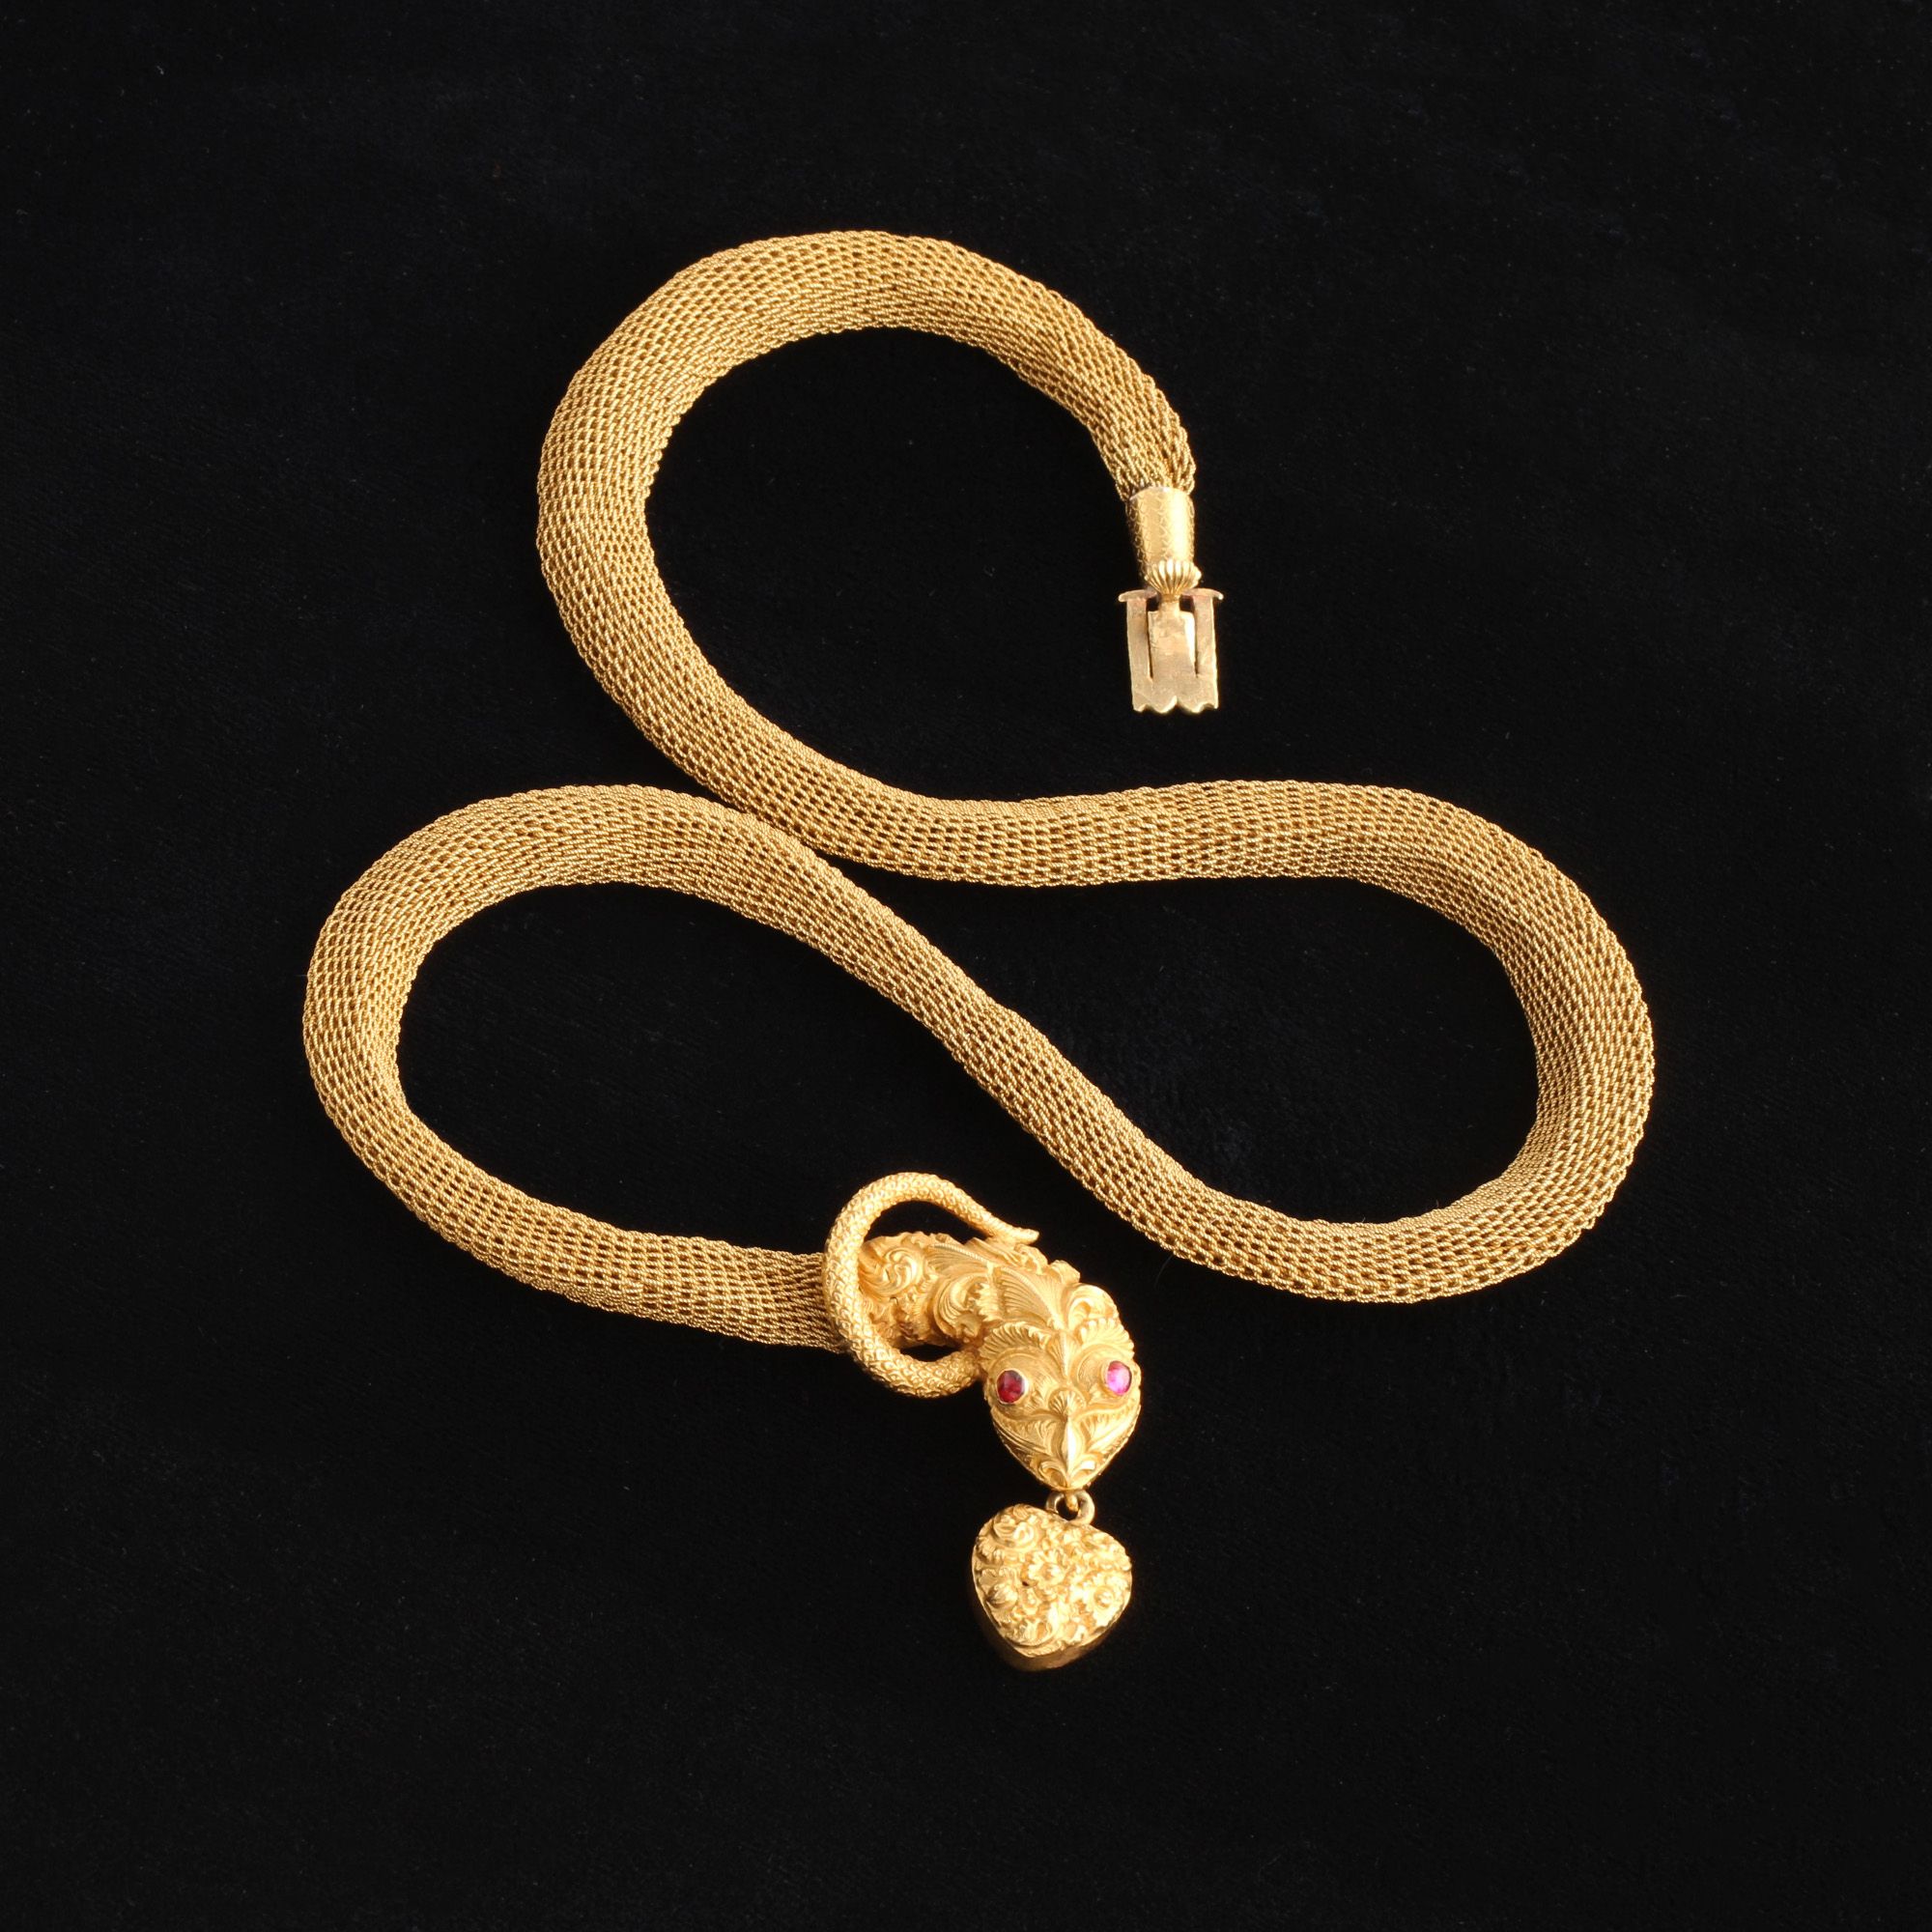 Victorian gold snake collar necklace